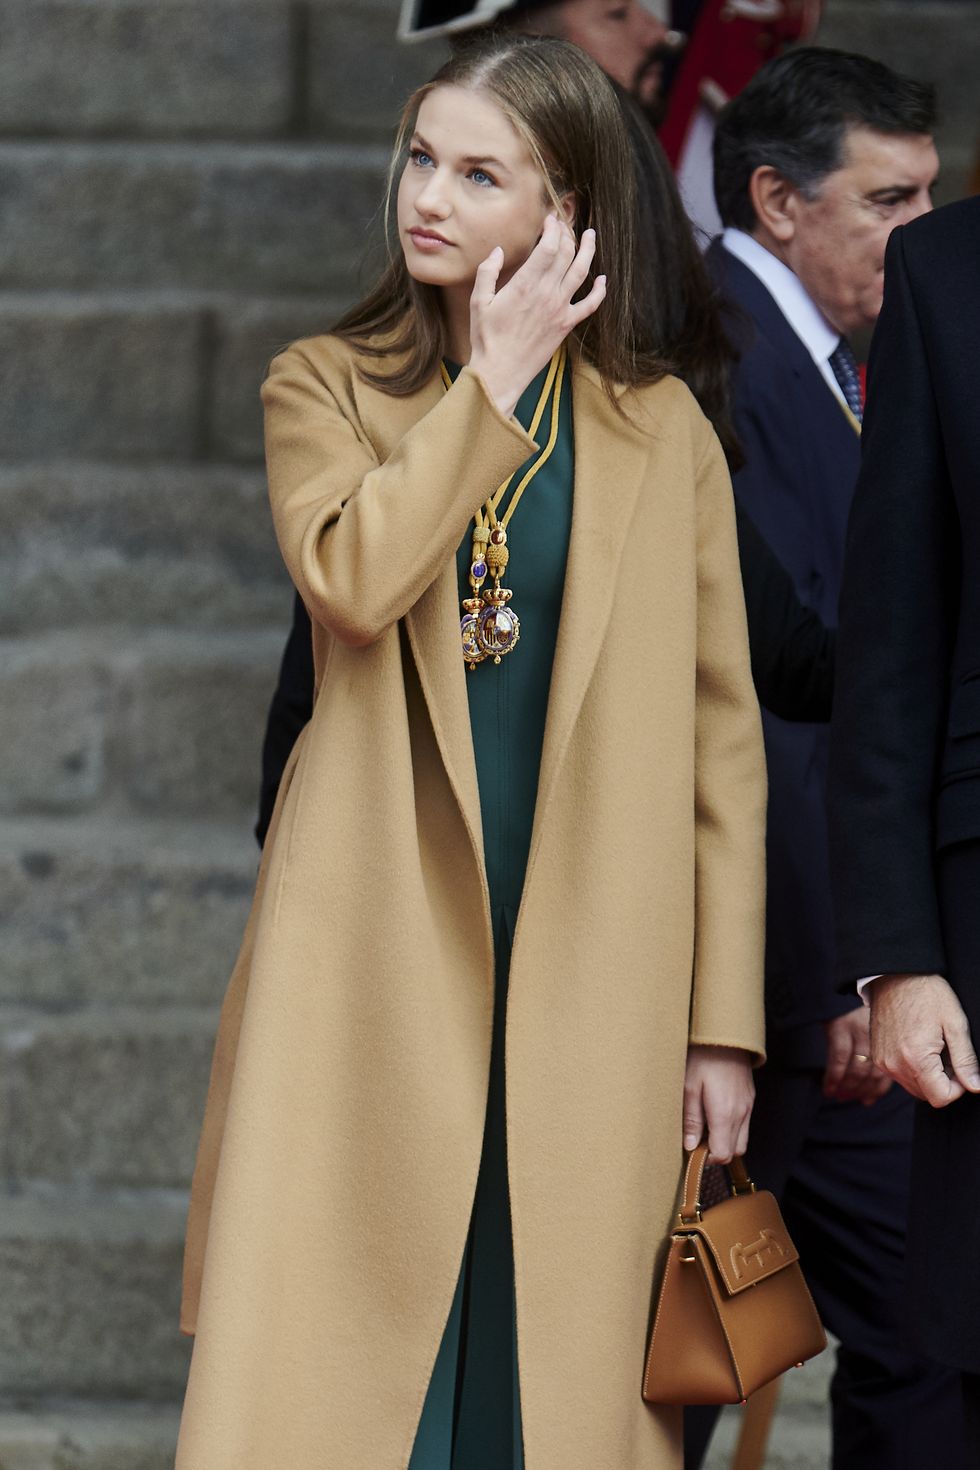 madrid, spain november 29 crown princess leonor of spain attends the solemn opening of the 15th legislature at the spanish parliamen on november 29, 2023 in madrid, spain photo by borja b hojasgetty images